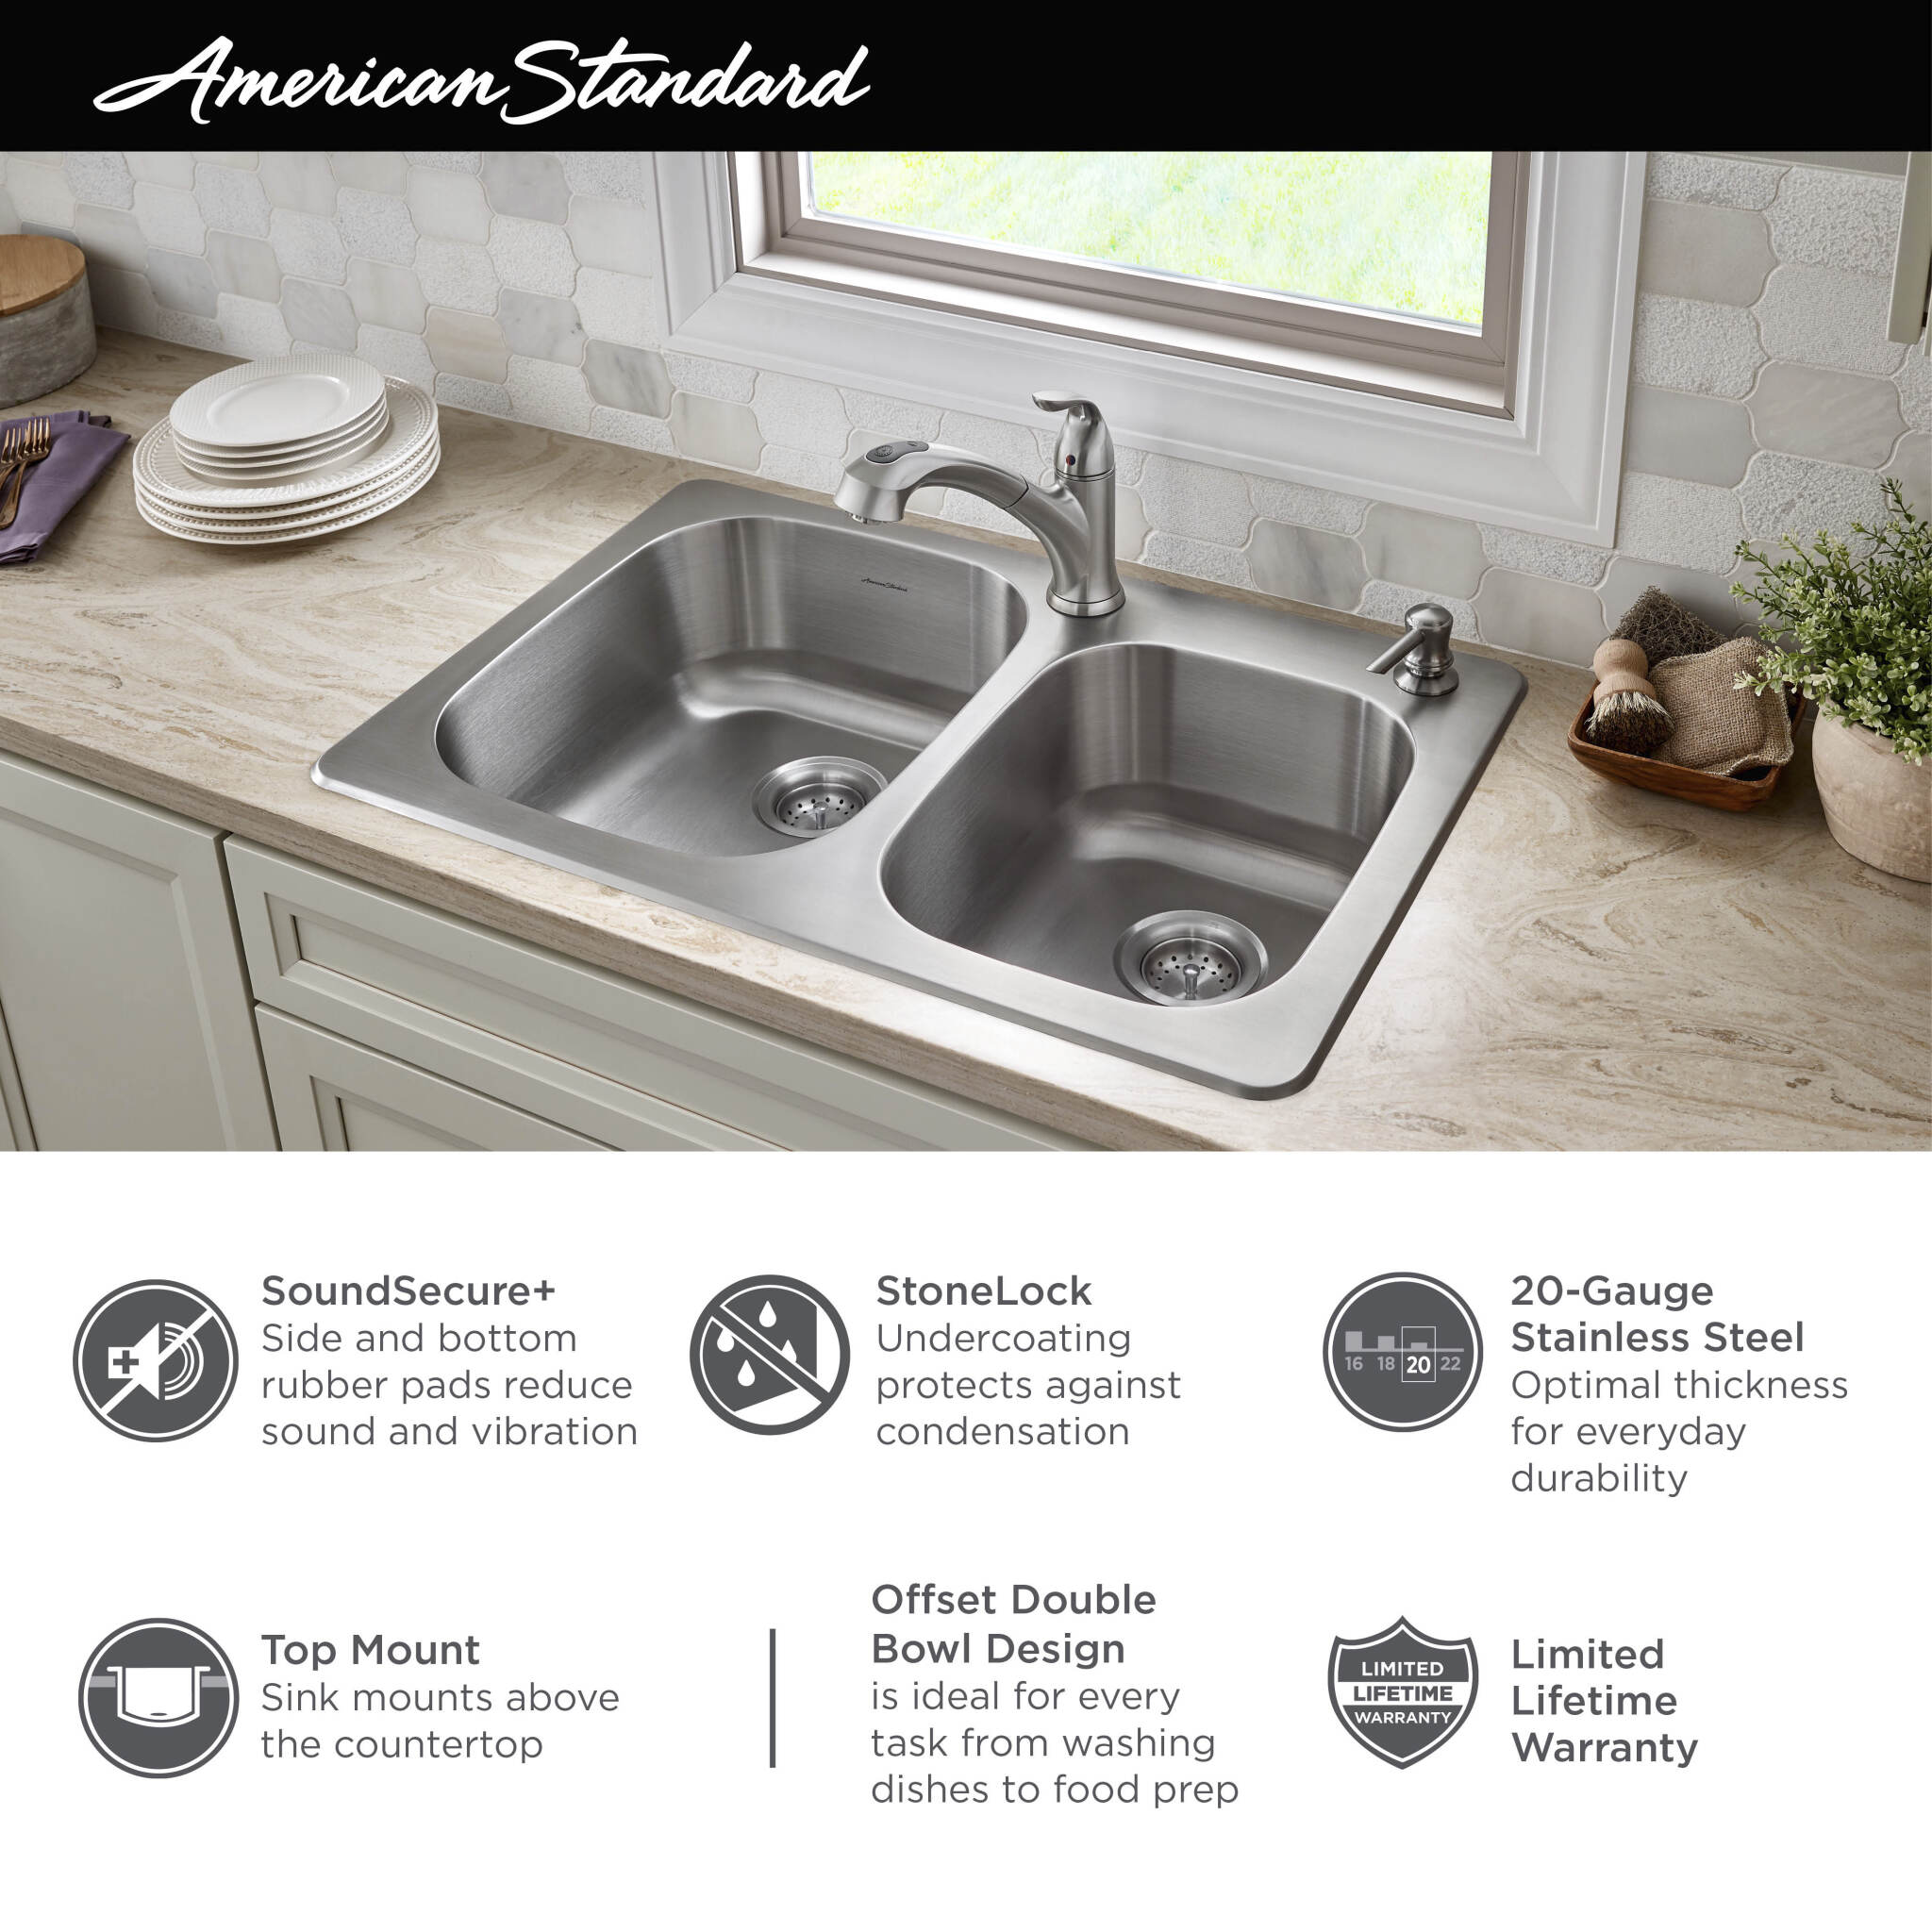 American Standard 20DB.8332284S.075 Colony Top Mount 33x22 Double Bowl Stainless Steel 4-hole Kitchen Sink,